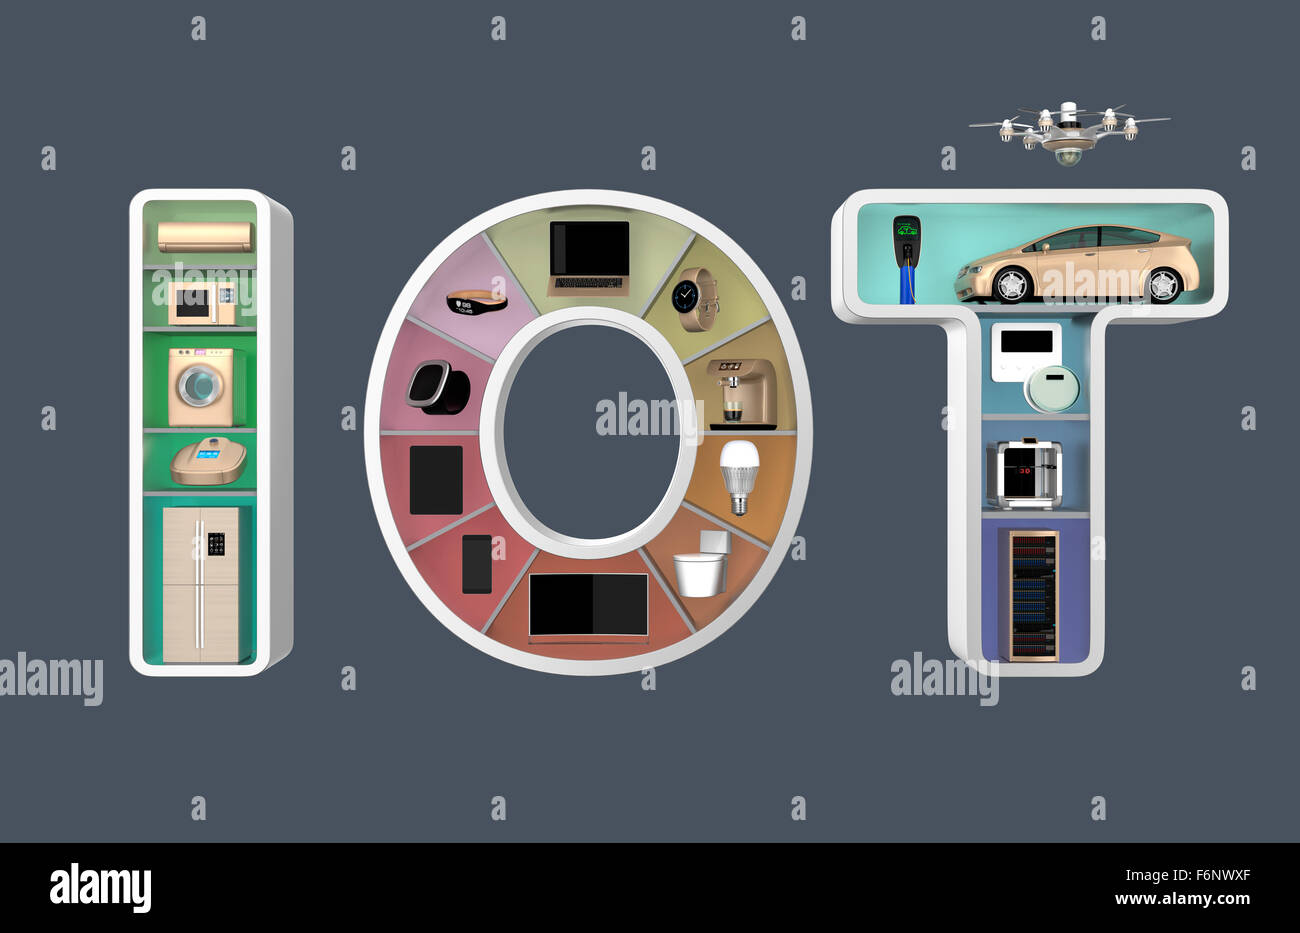 Internet of Things Concept for home appliances. Original design. Stock Photo